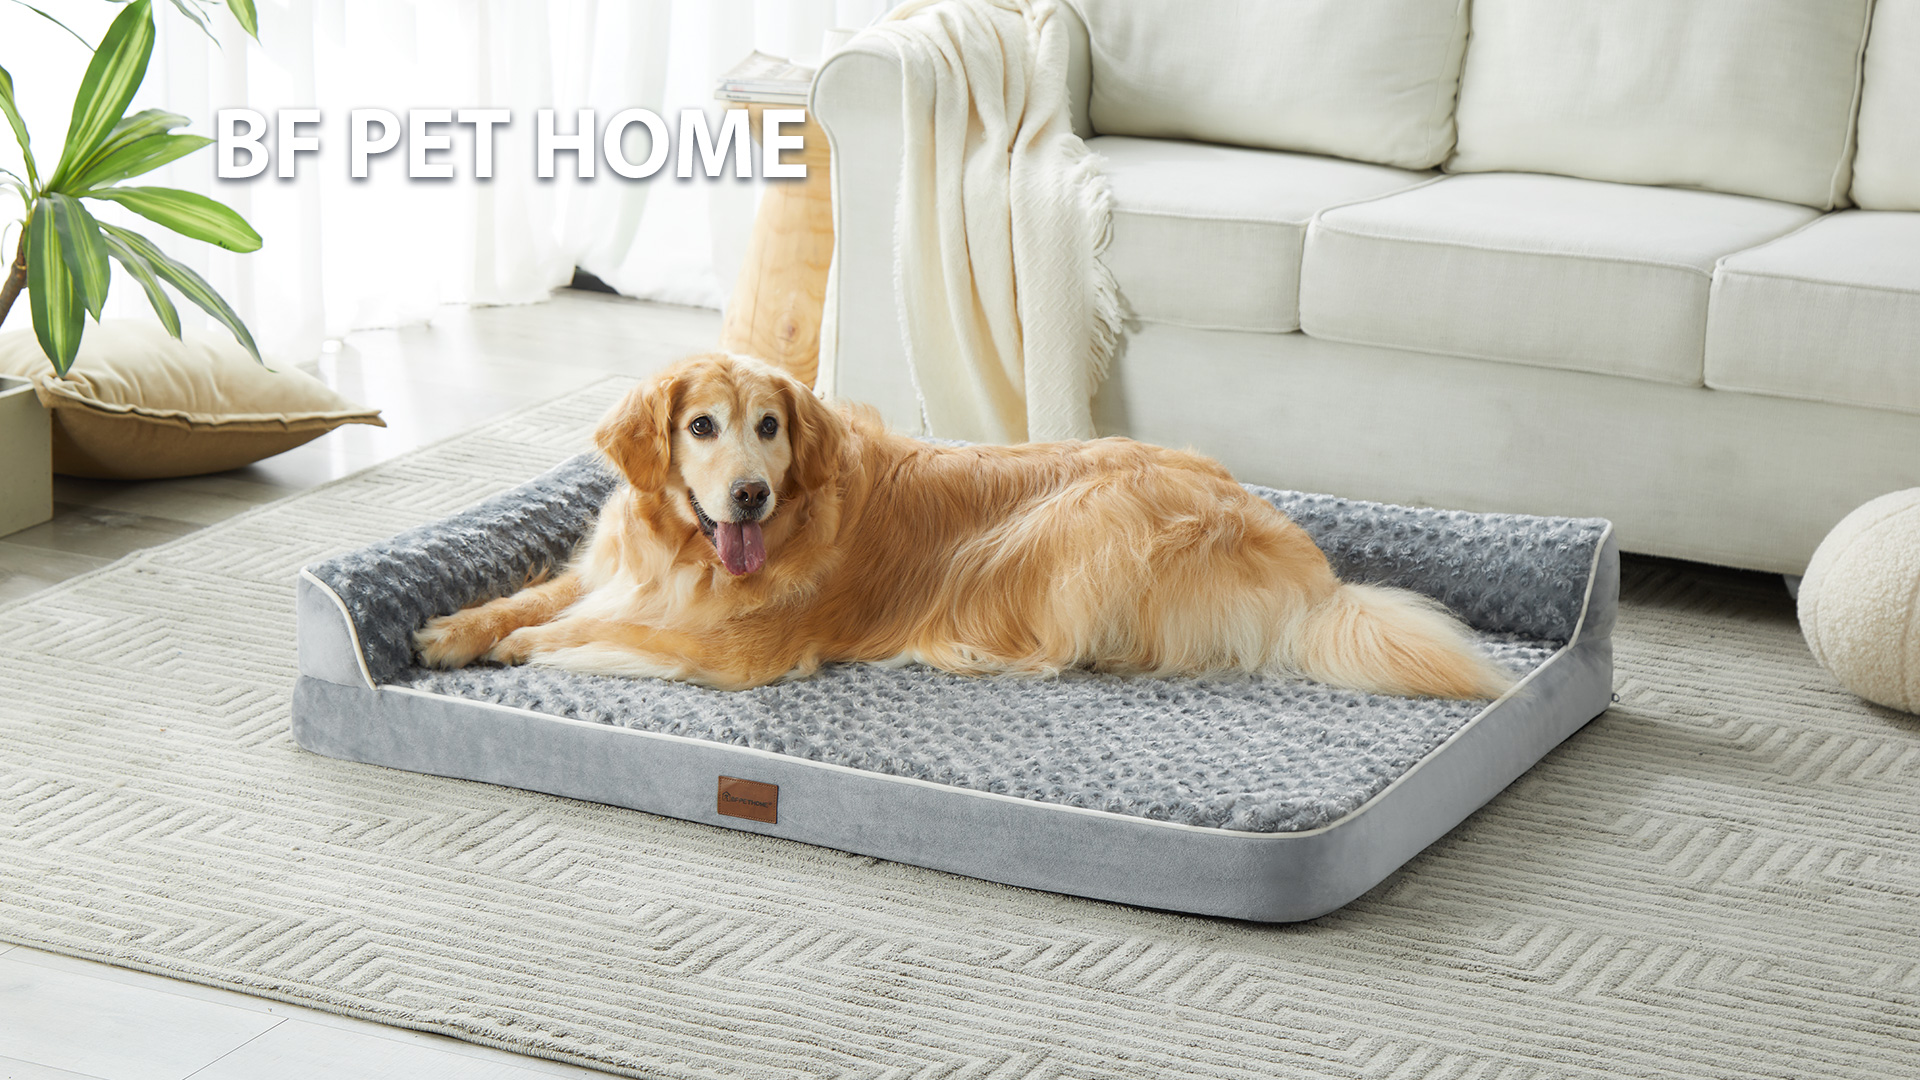 Orthopedic Dog Beds for Large Dogs, Dog Bed with Removable Washable Cover